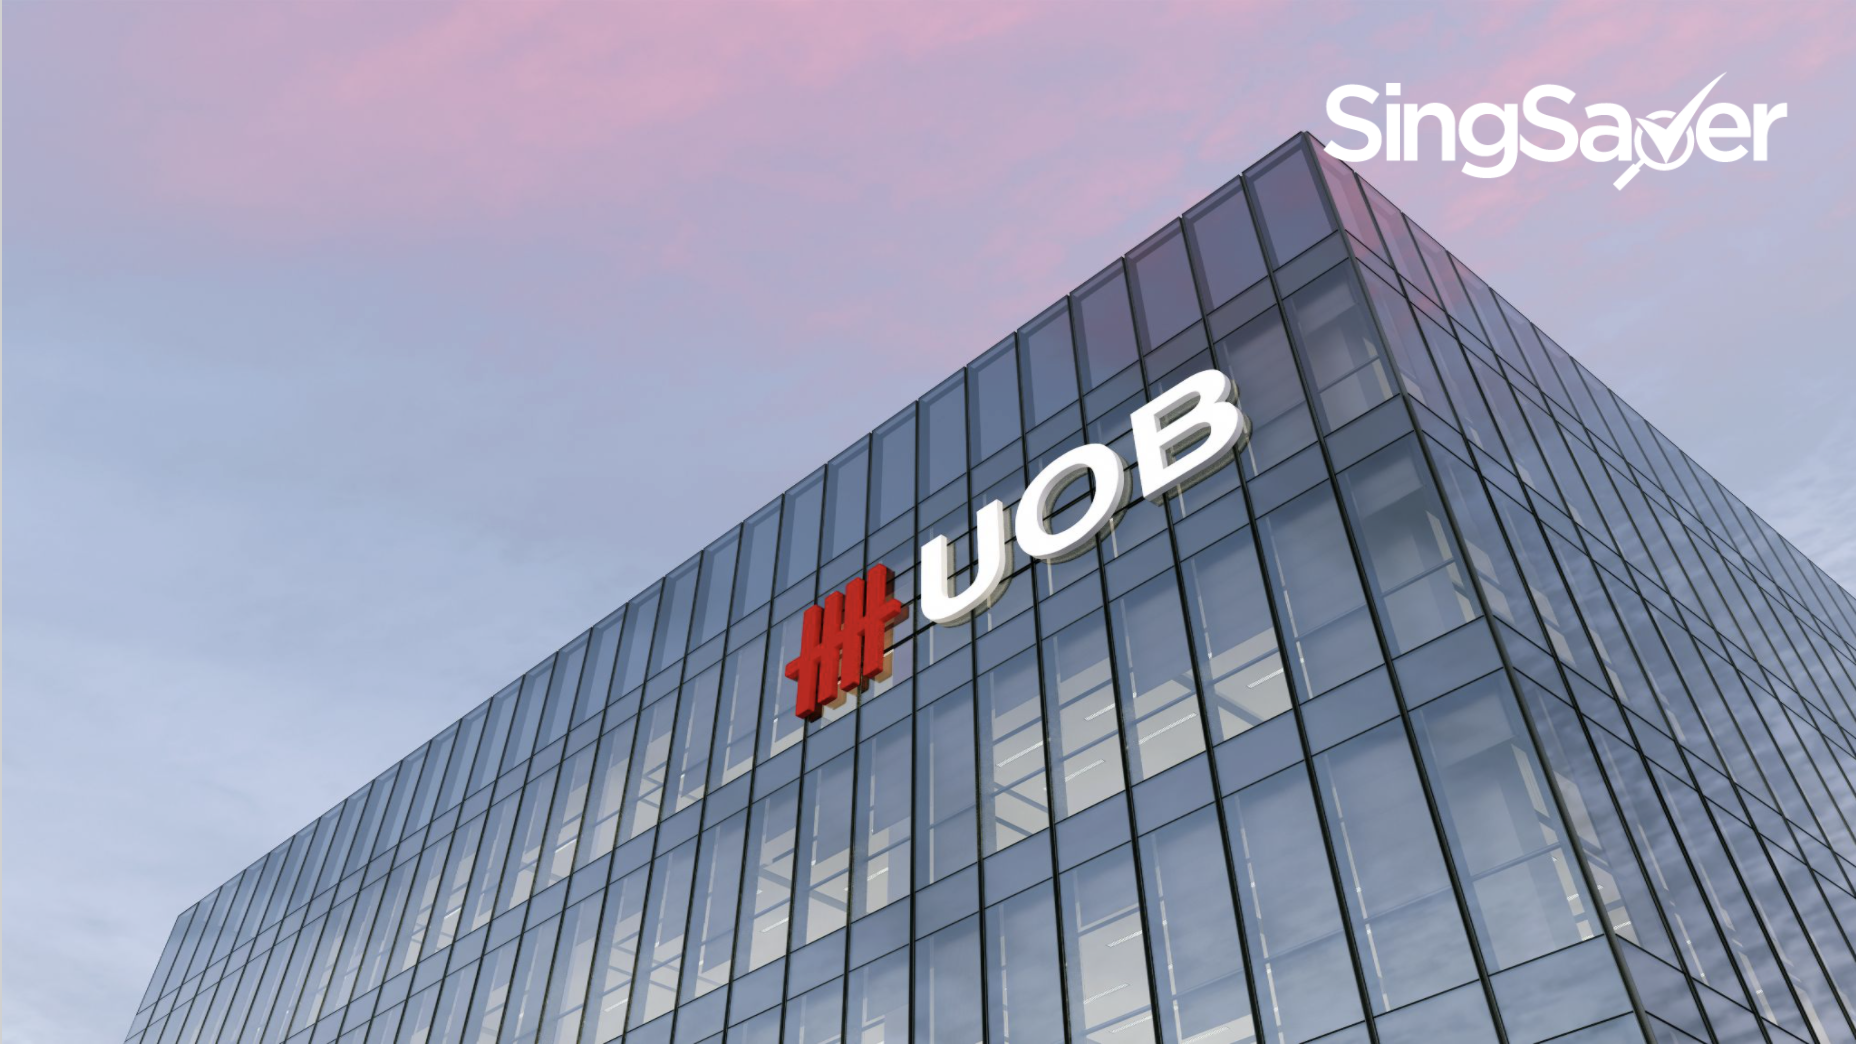 UOB Privilege Banking Singapore Review (2021): A Top-notch Premier Banking Platform For Those Who Can Pay The Price